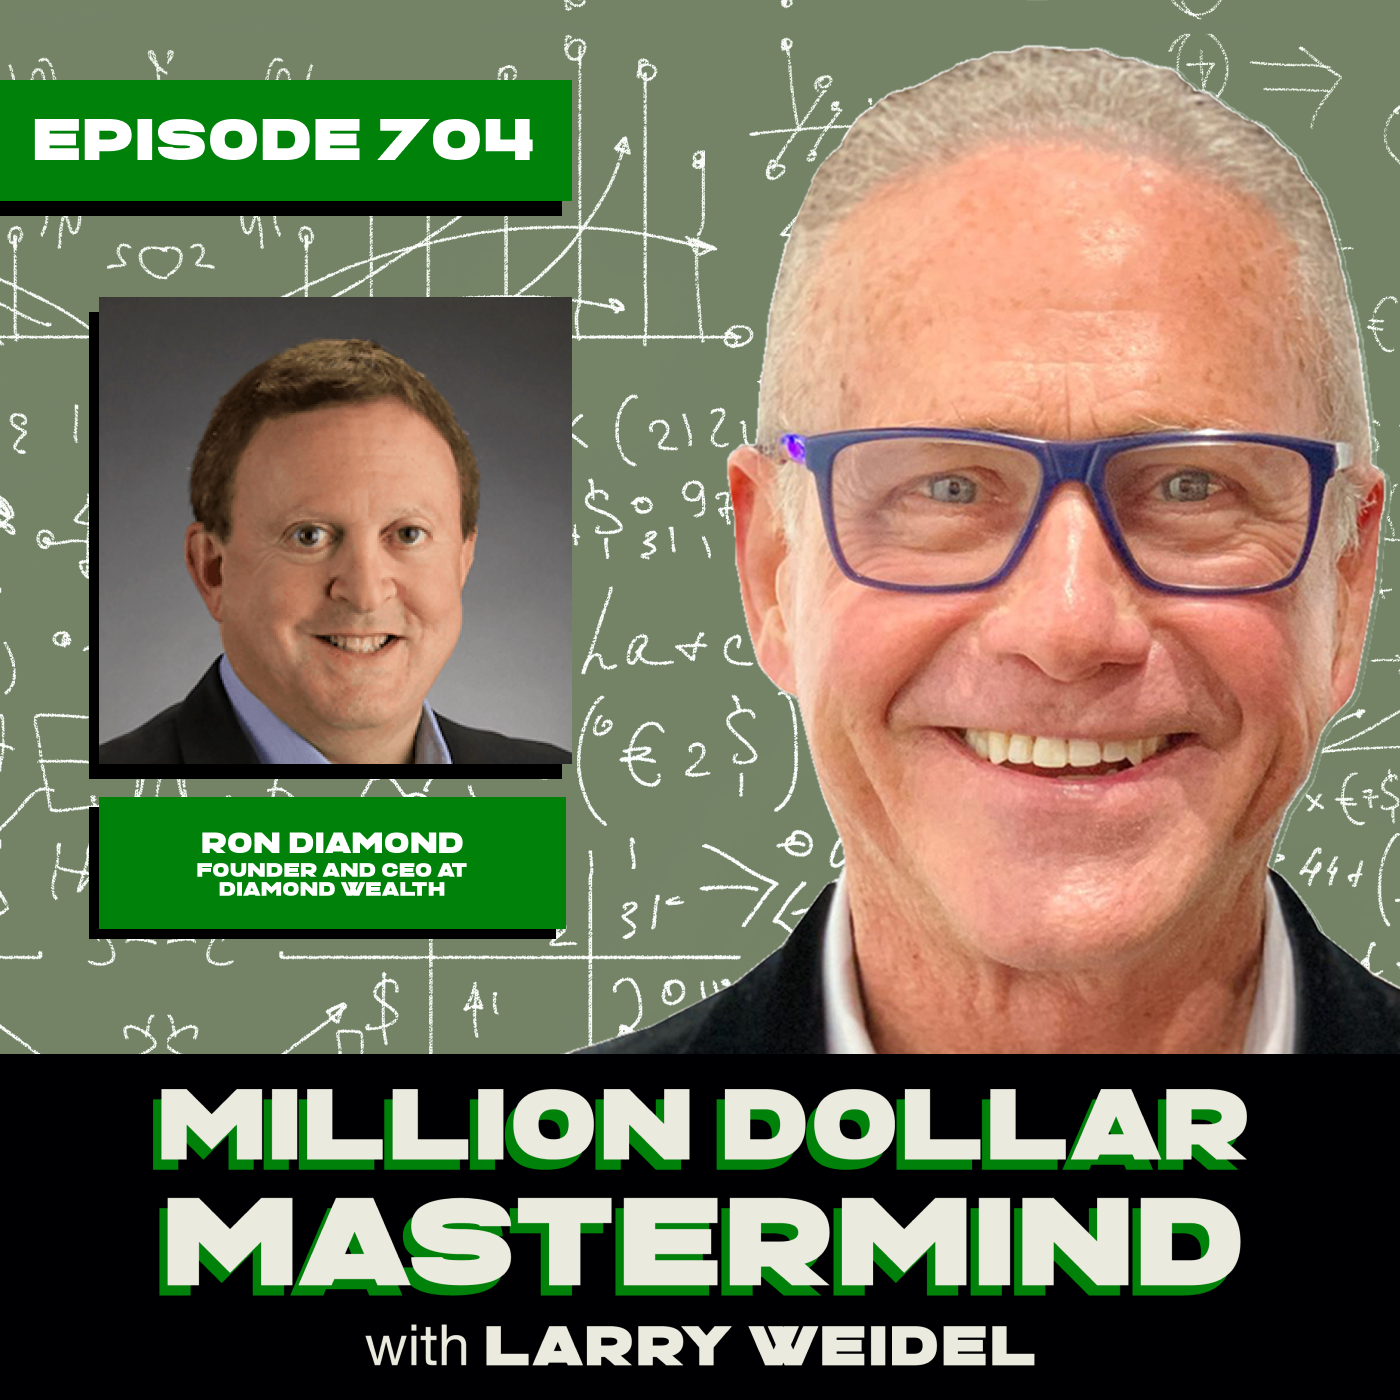 Episode #704 - Love What You Do with Ron Diamond, Founder of Diamond Wealth